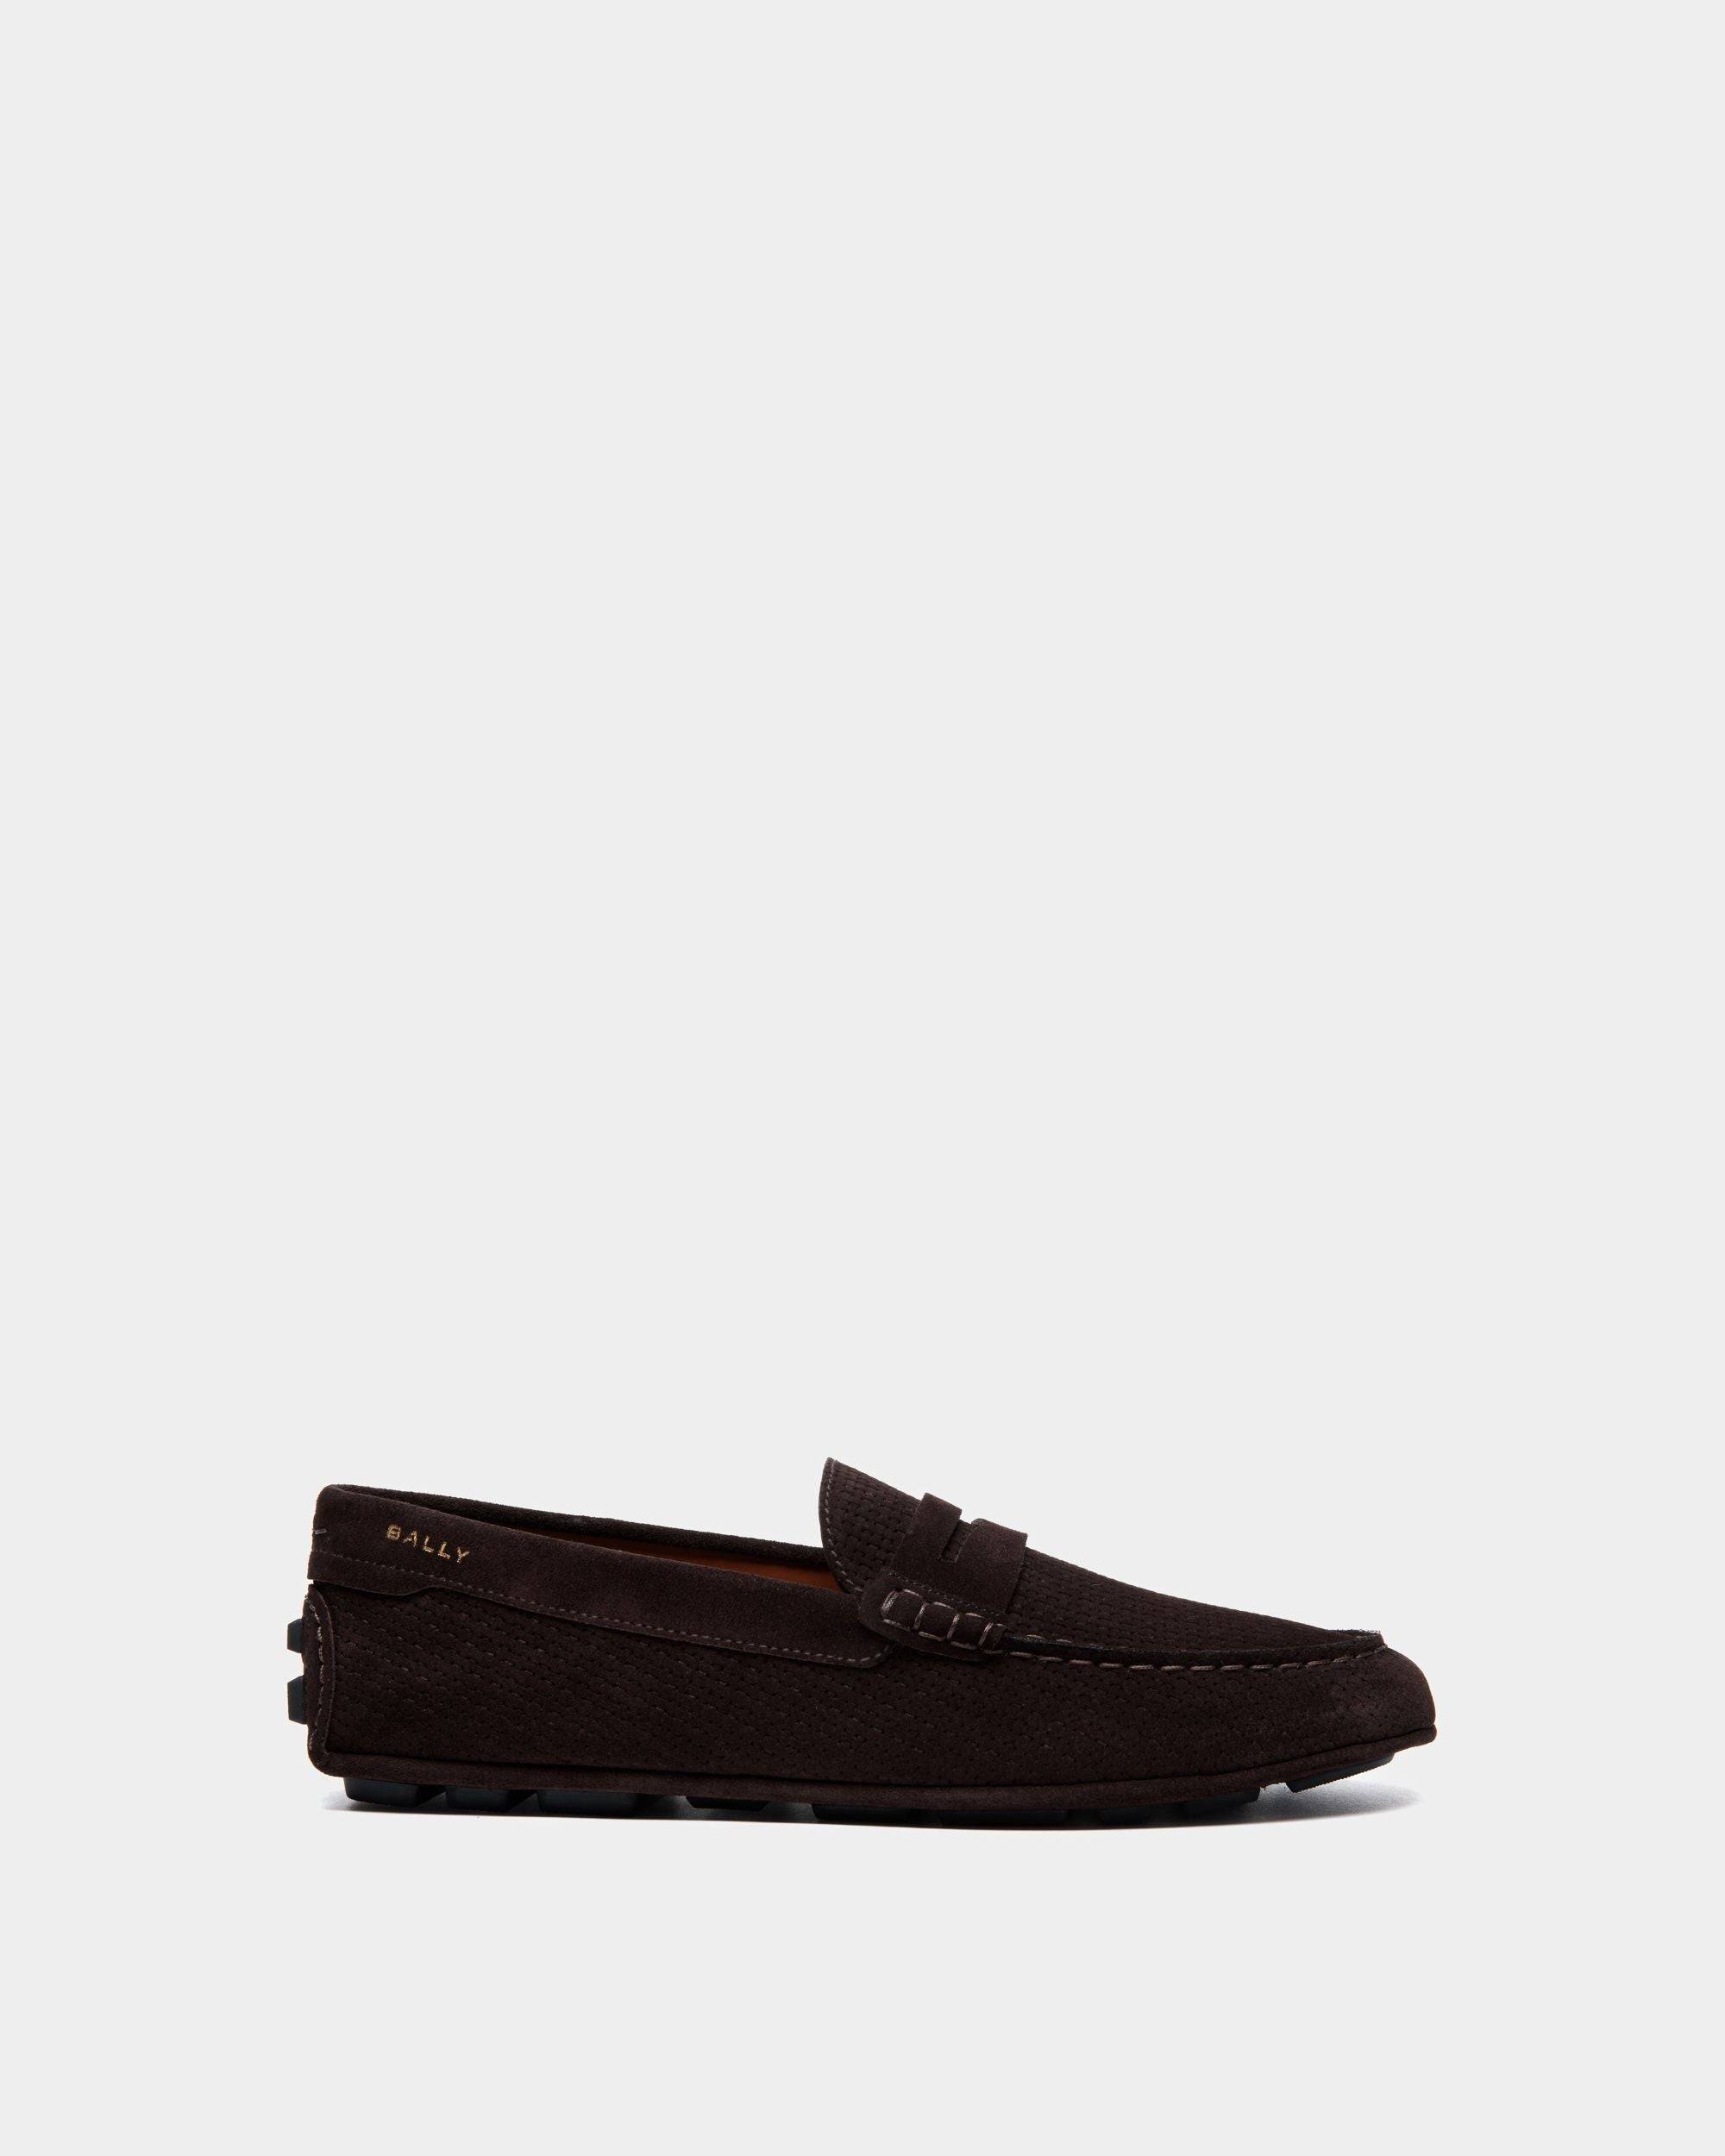 Men's Kerbs Driver in Embossed Suede | Bally | Still Life Side